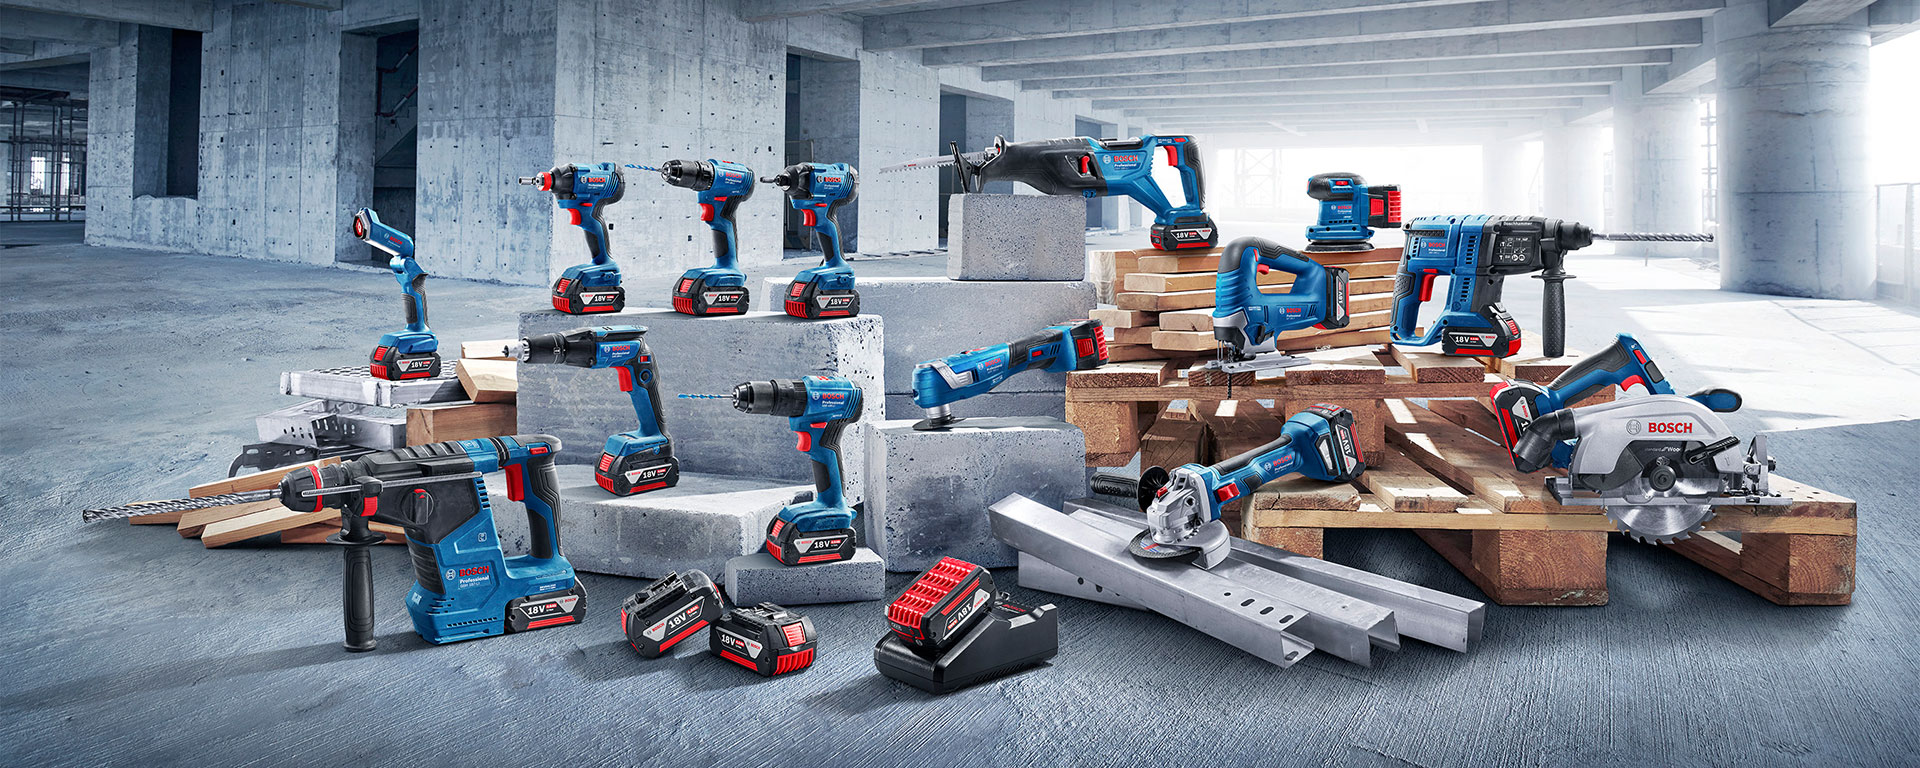 Learn about Bosch Professional Products